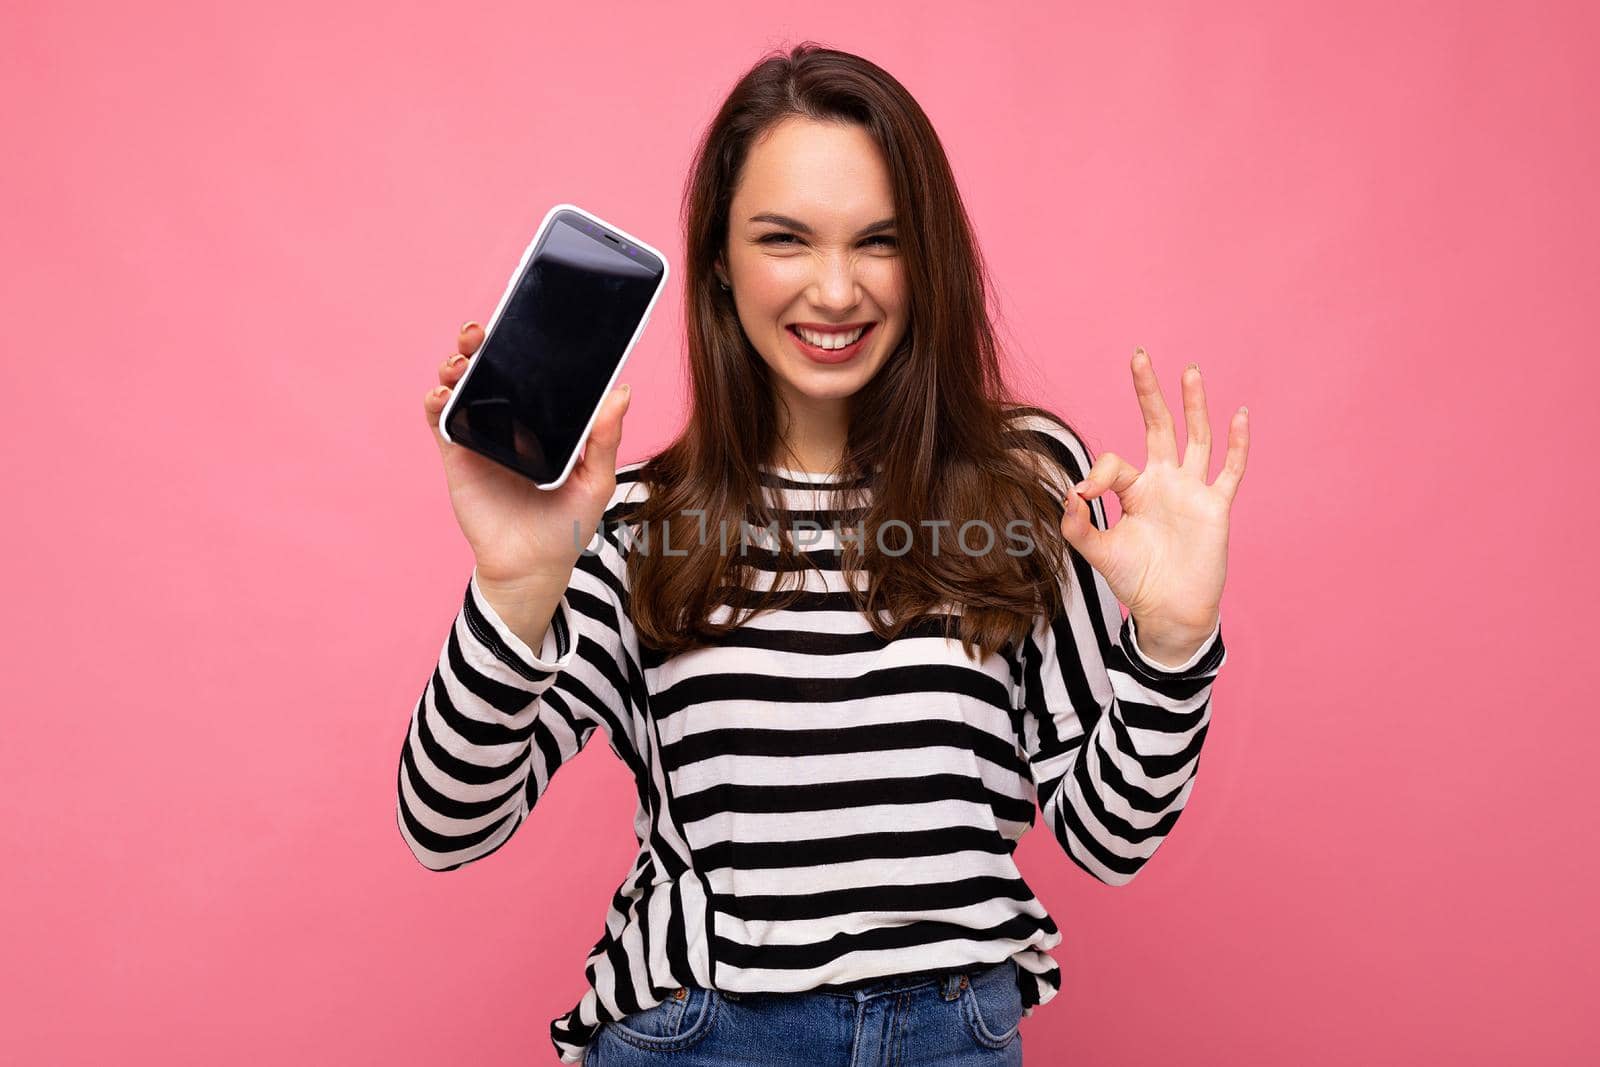 Funny beautiful happy young woman wearing striped sweater isolated over background with copy space showing ok gesture looking at camera showing mobile phone screen display by TRMK